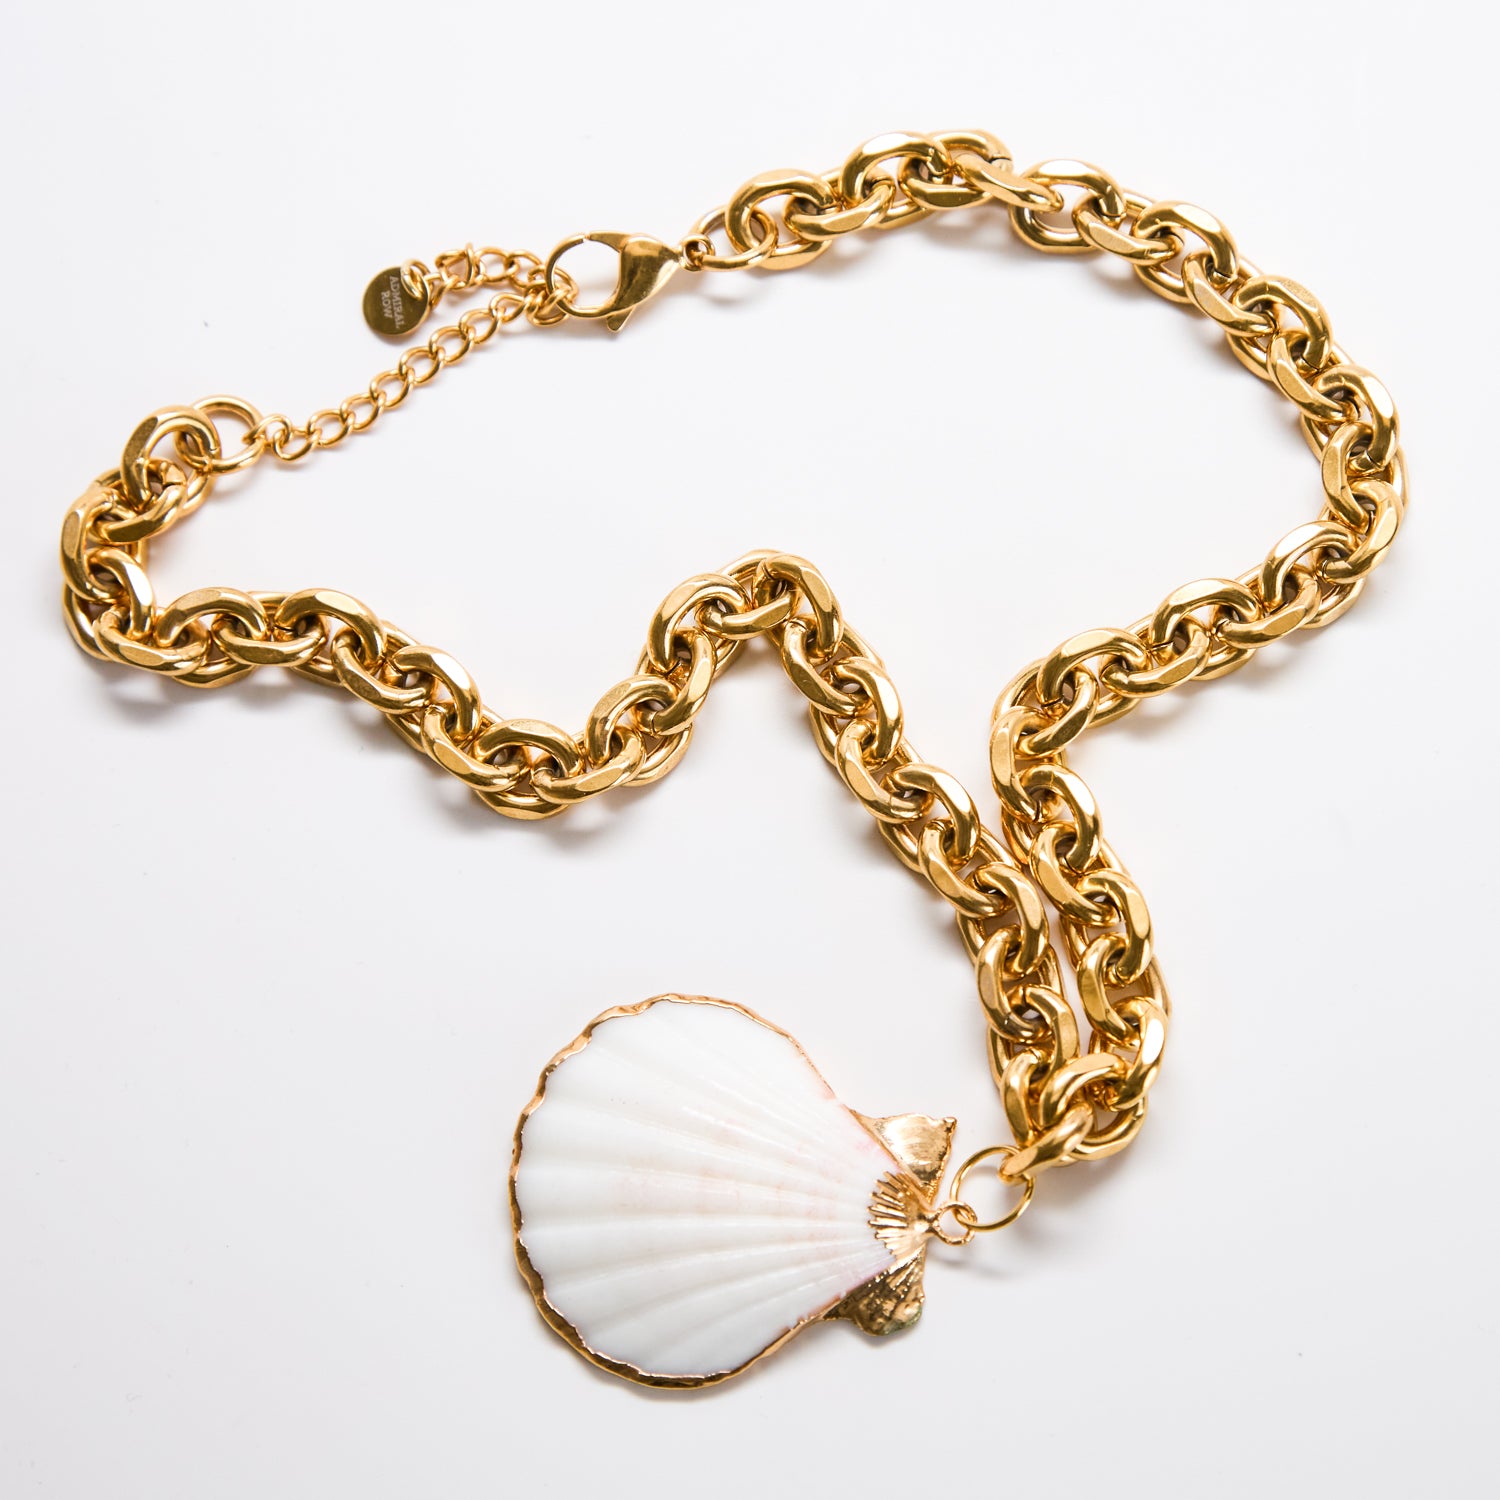 Vintage White Shell Statement Necklace